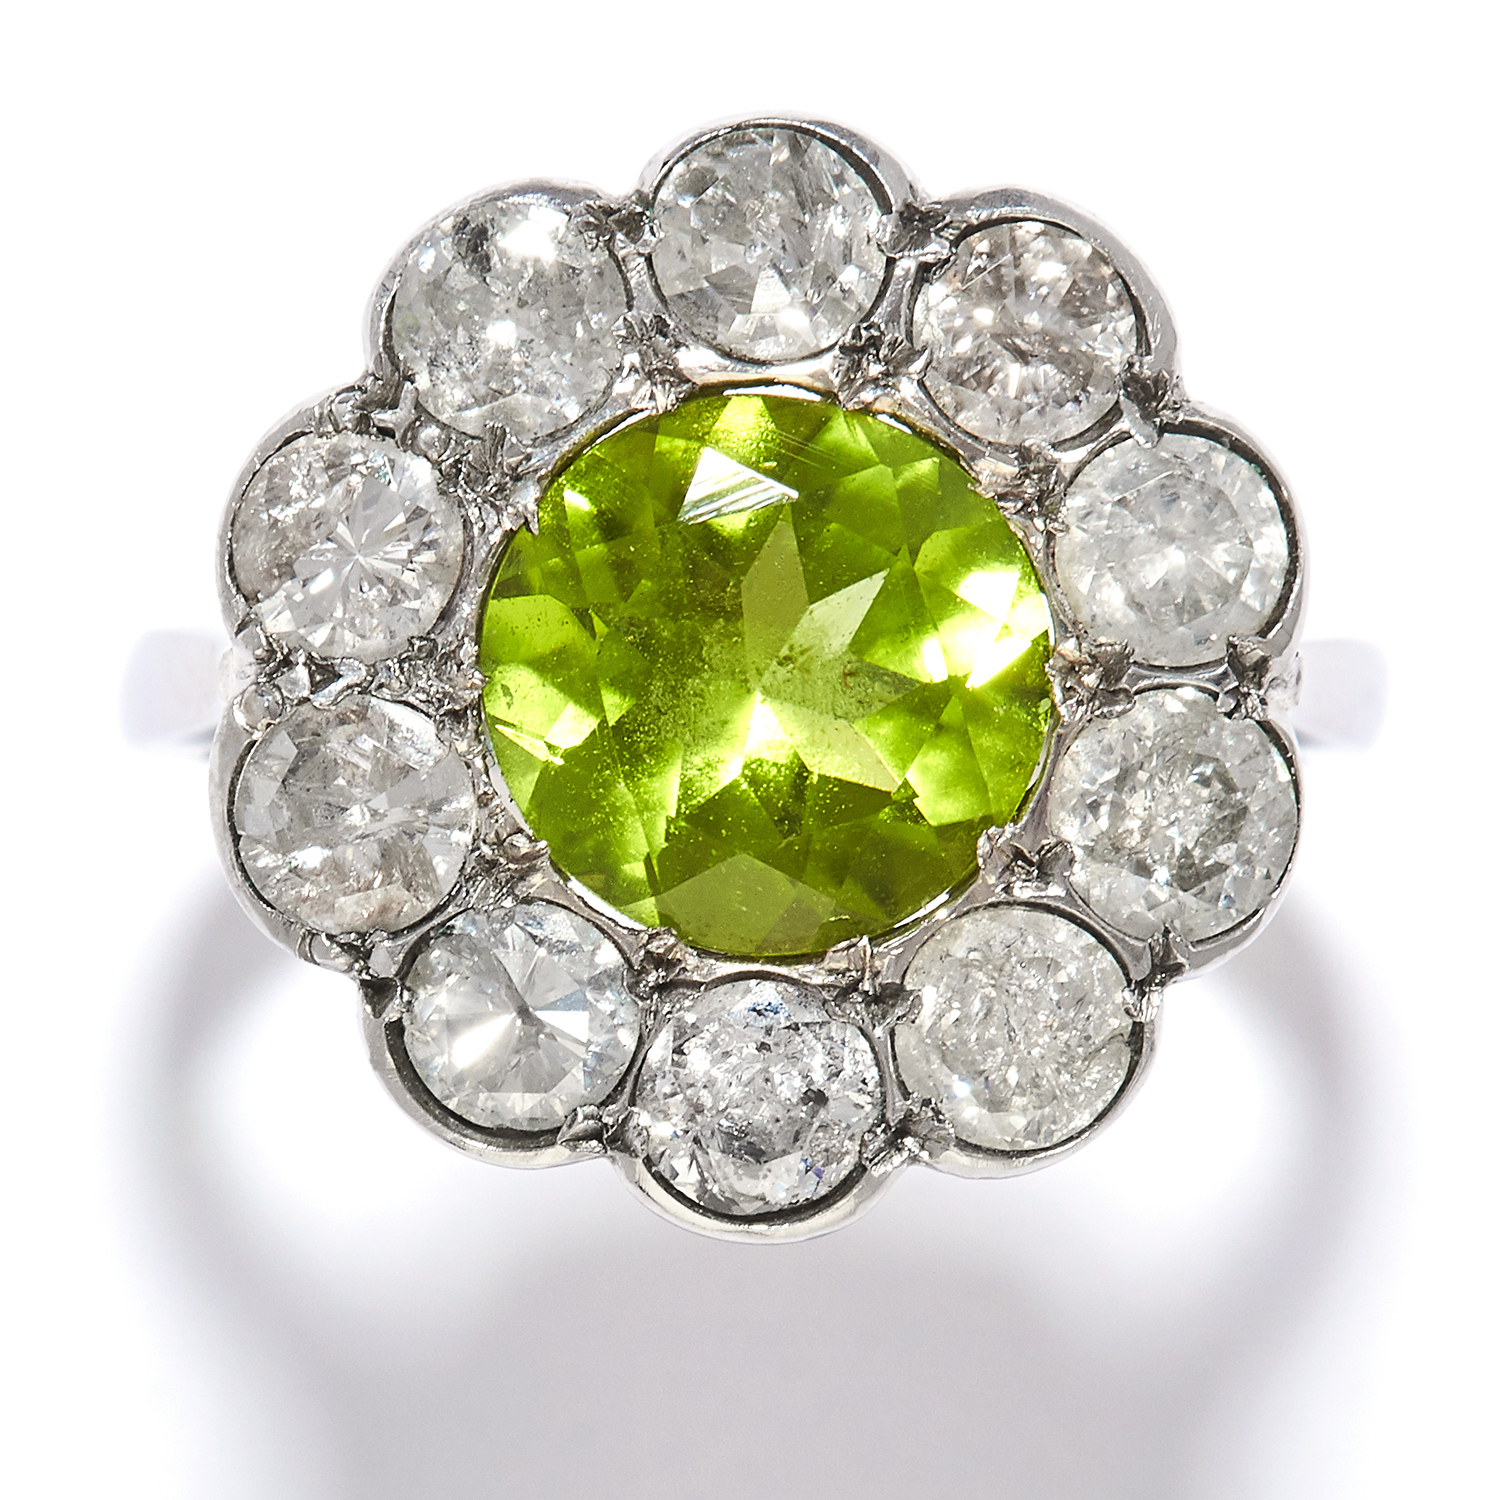 PERIDOT AND DIAMOND CLUSTER RING in platinum or white gold, the round cut peridot encircled by